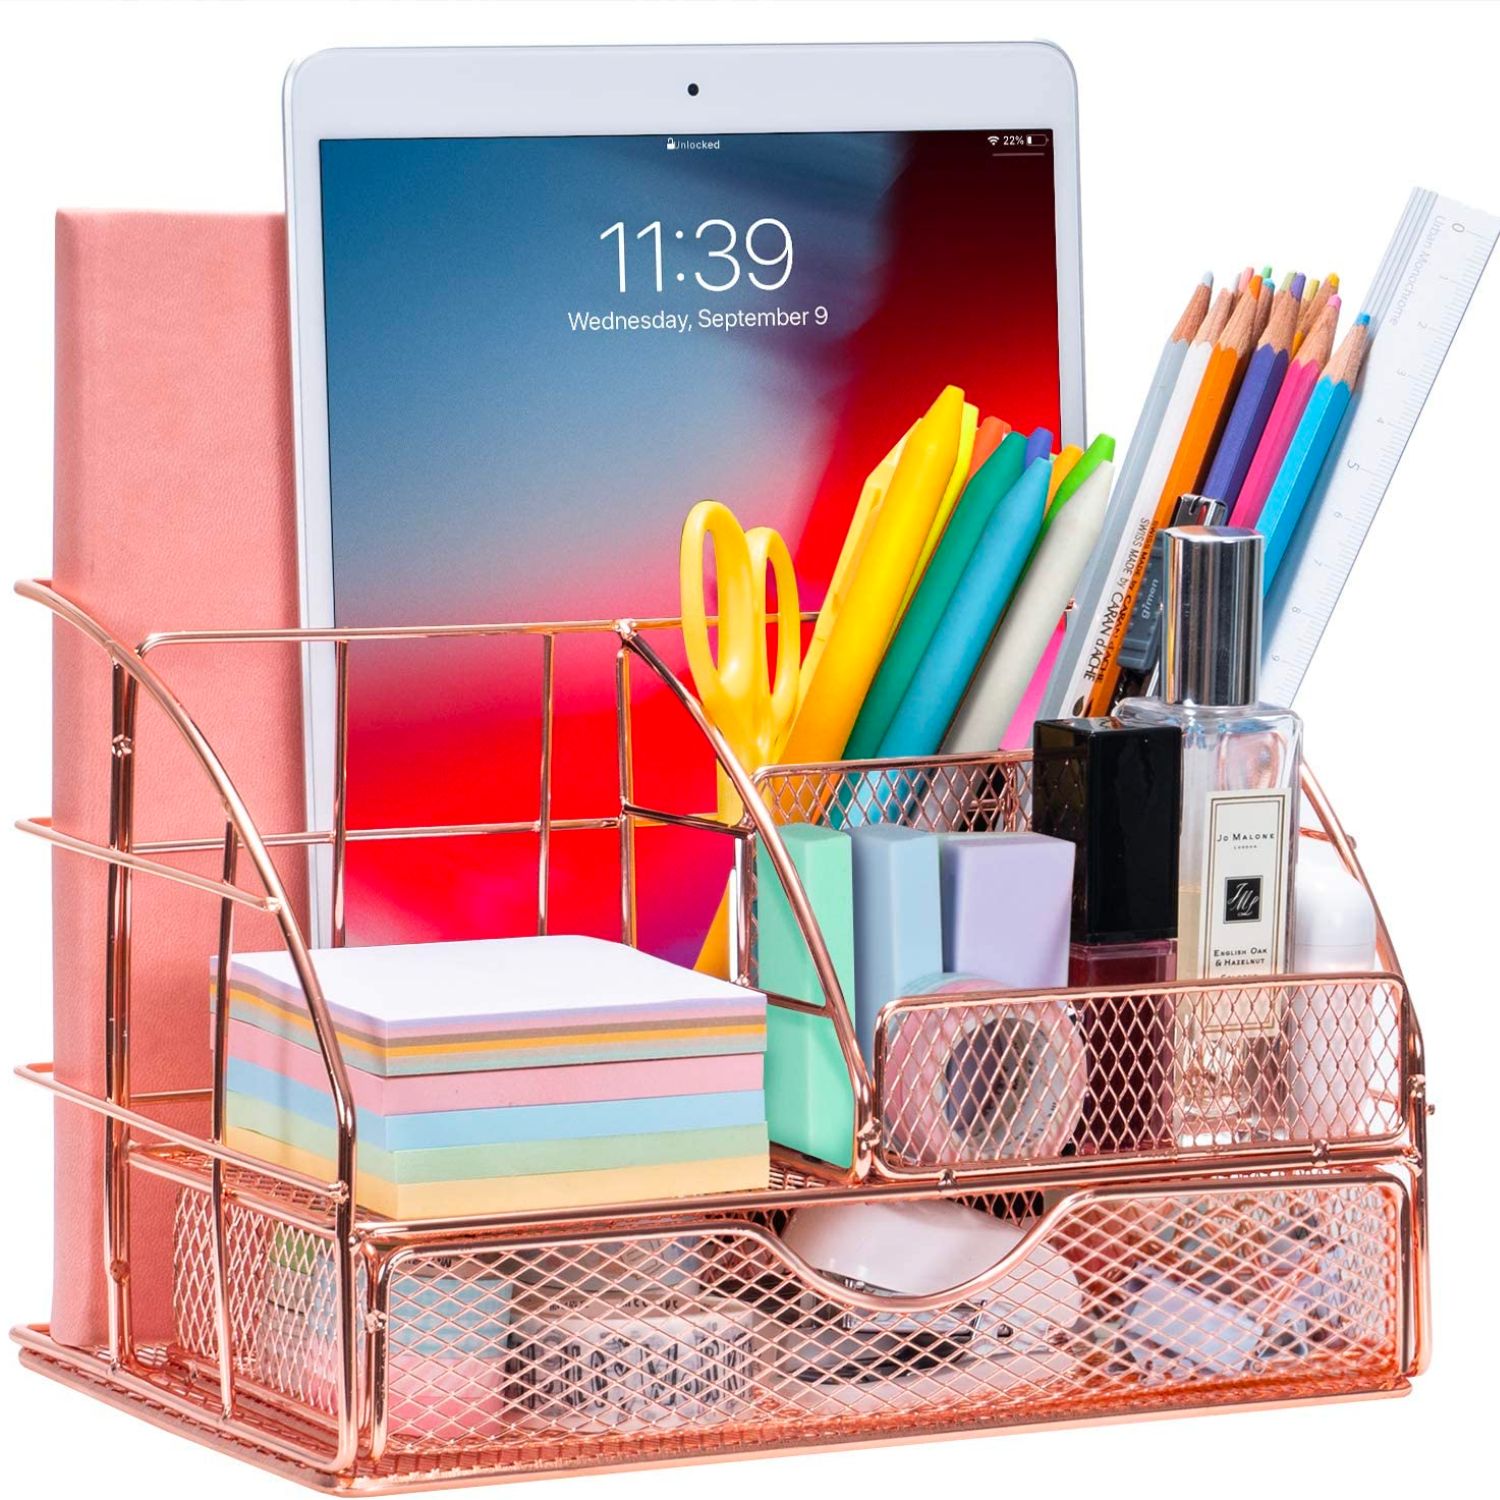 The Best Gifts for College Students: Desk Organizer